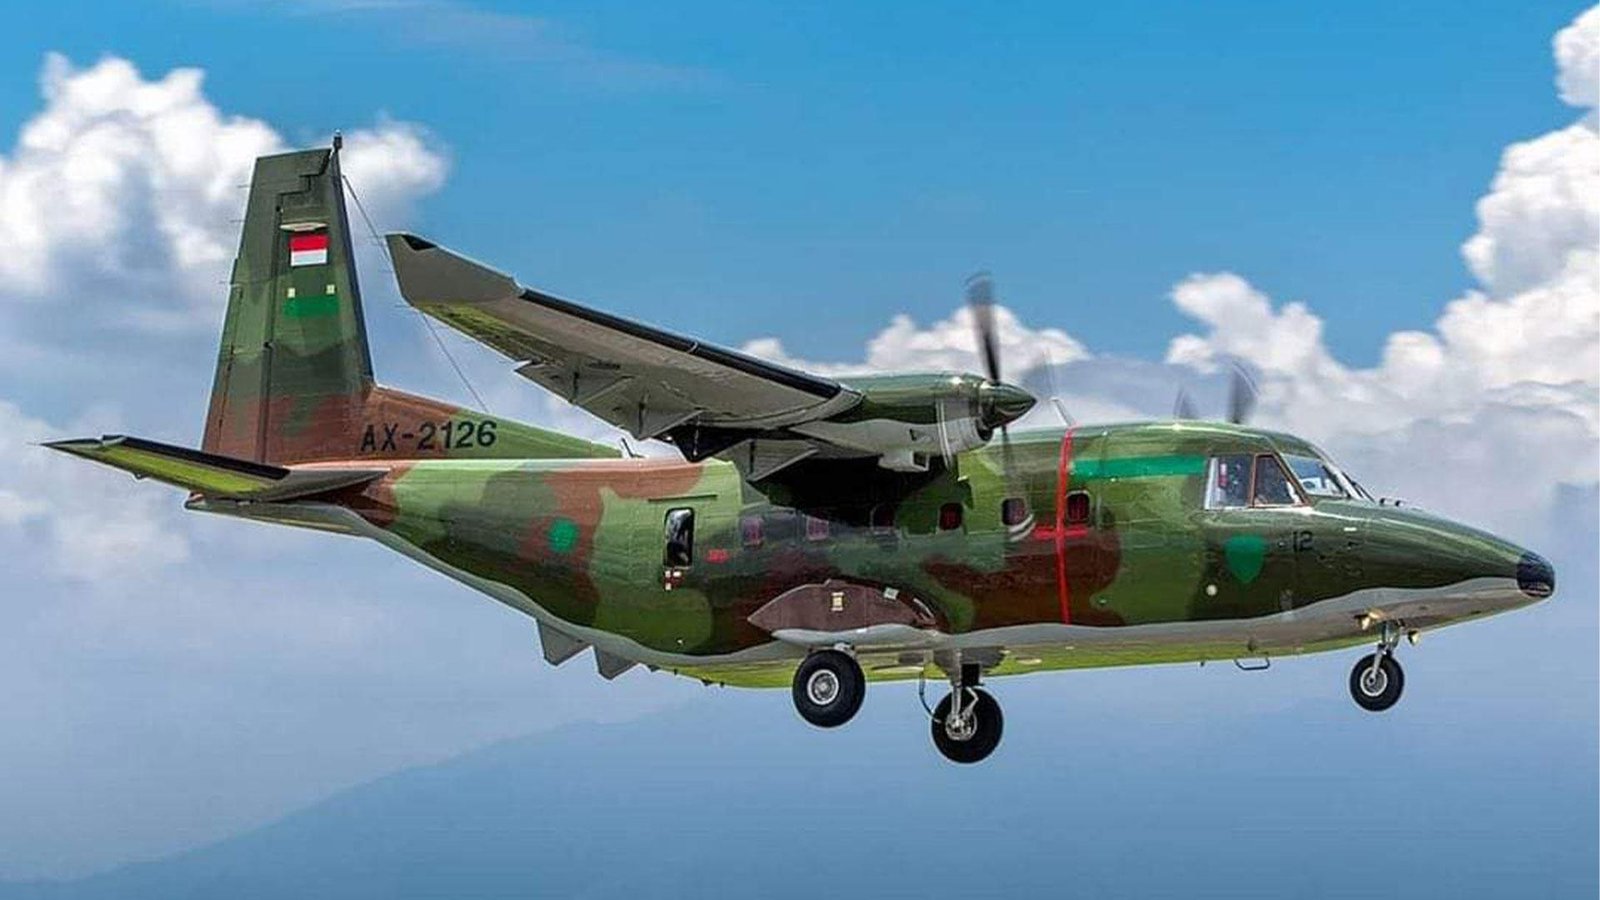 PTDI Delivers Cutting-Edge NC212i to Indonesian Air Force